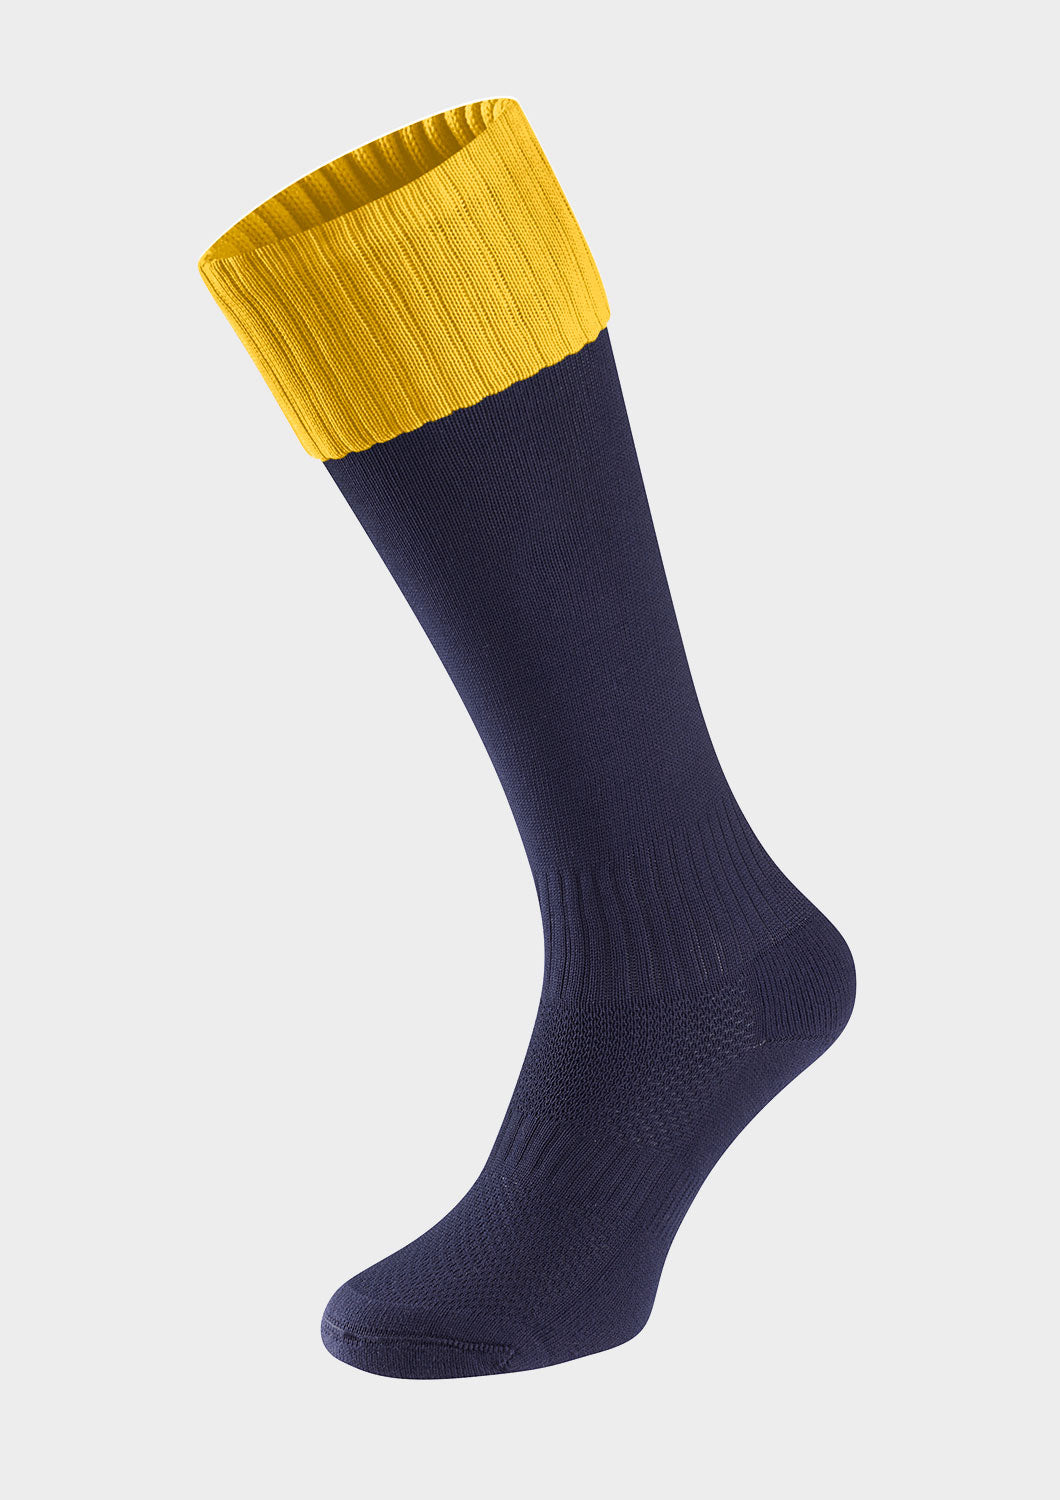 Navy And Gold Sport Socks